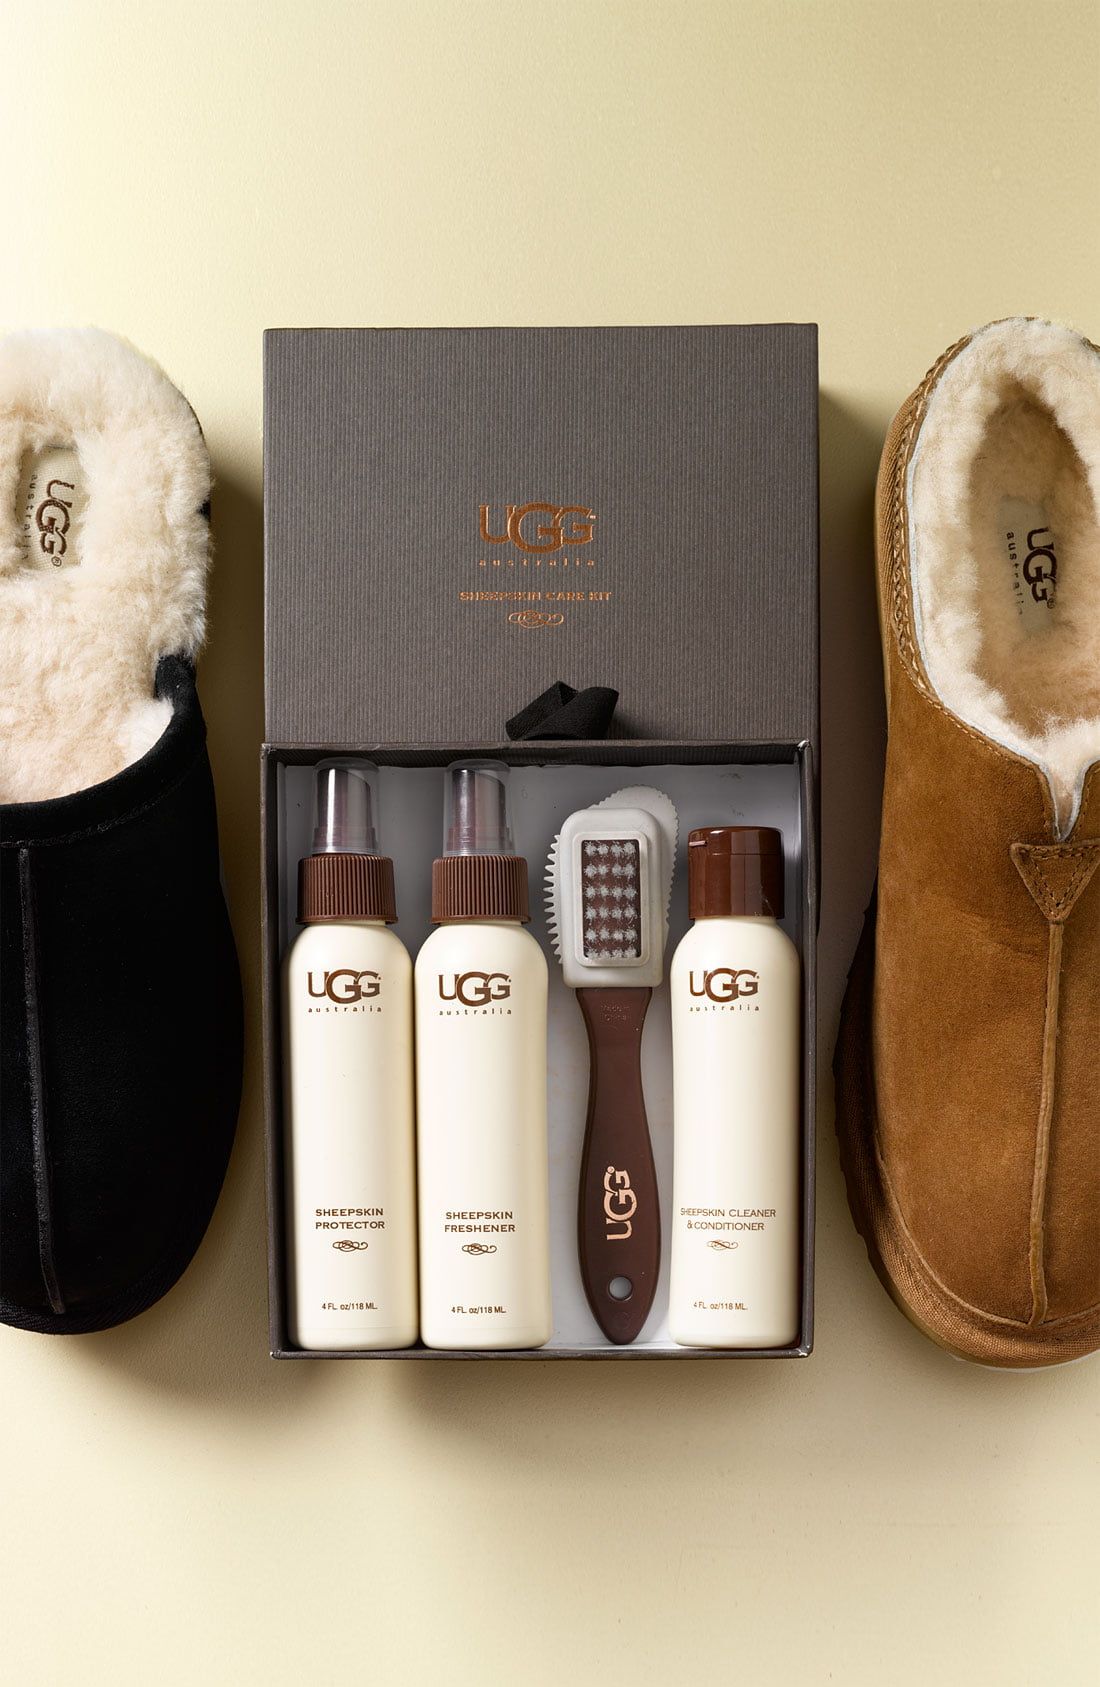 how to restore uggs at home